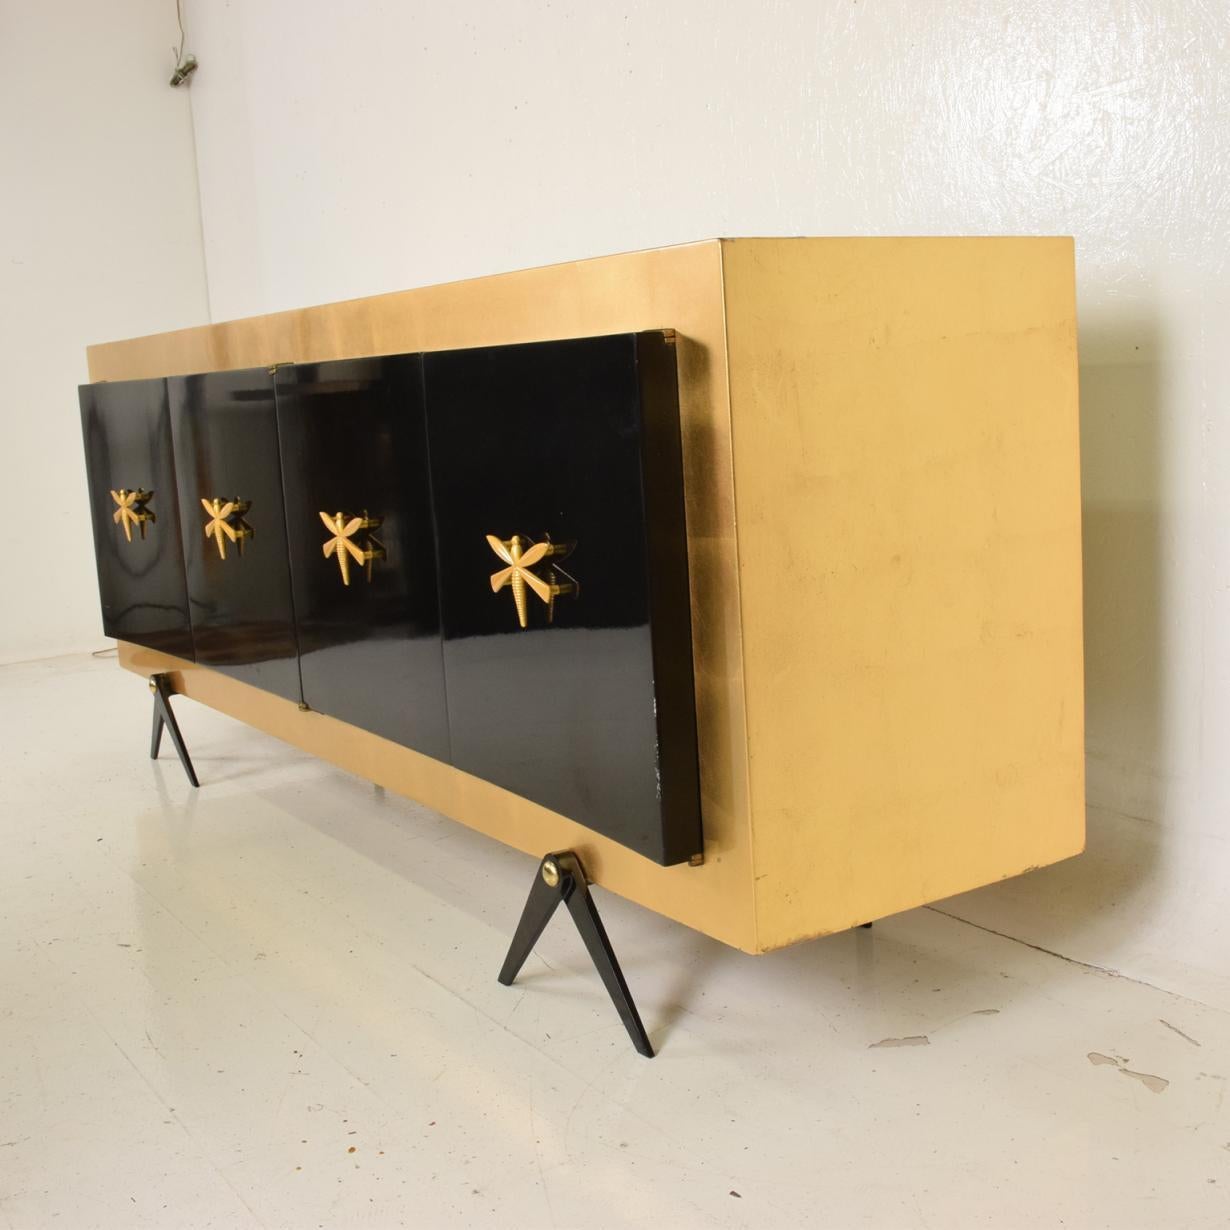 For your consideration, a midcentury Mexican Modernist stunning credenza after Arturo Pani.


A beautifully restored condition in gold leaf and black lacquer. 


Bronze butterfly pull handles decorate the four doors. Open storage with no drawers.